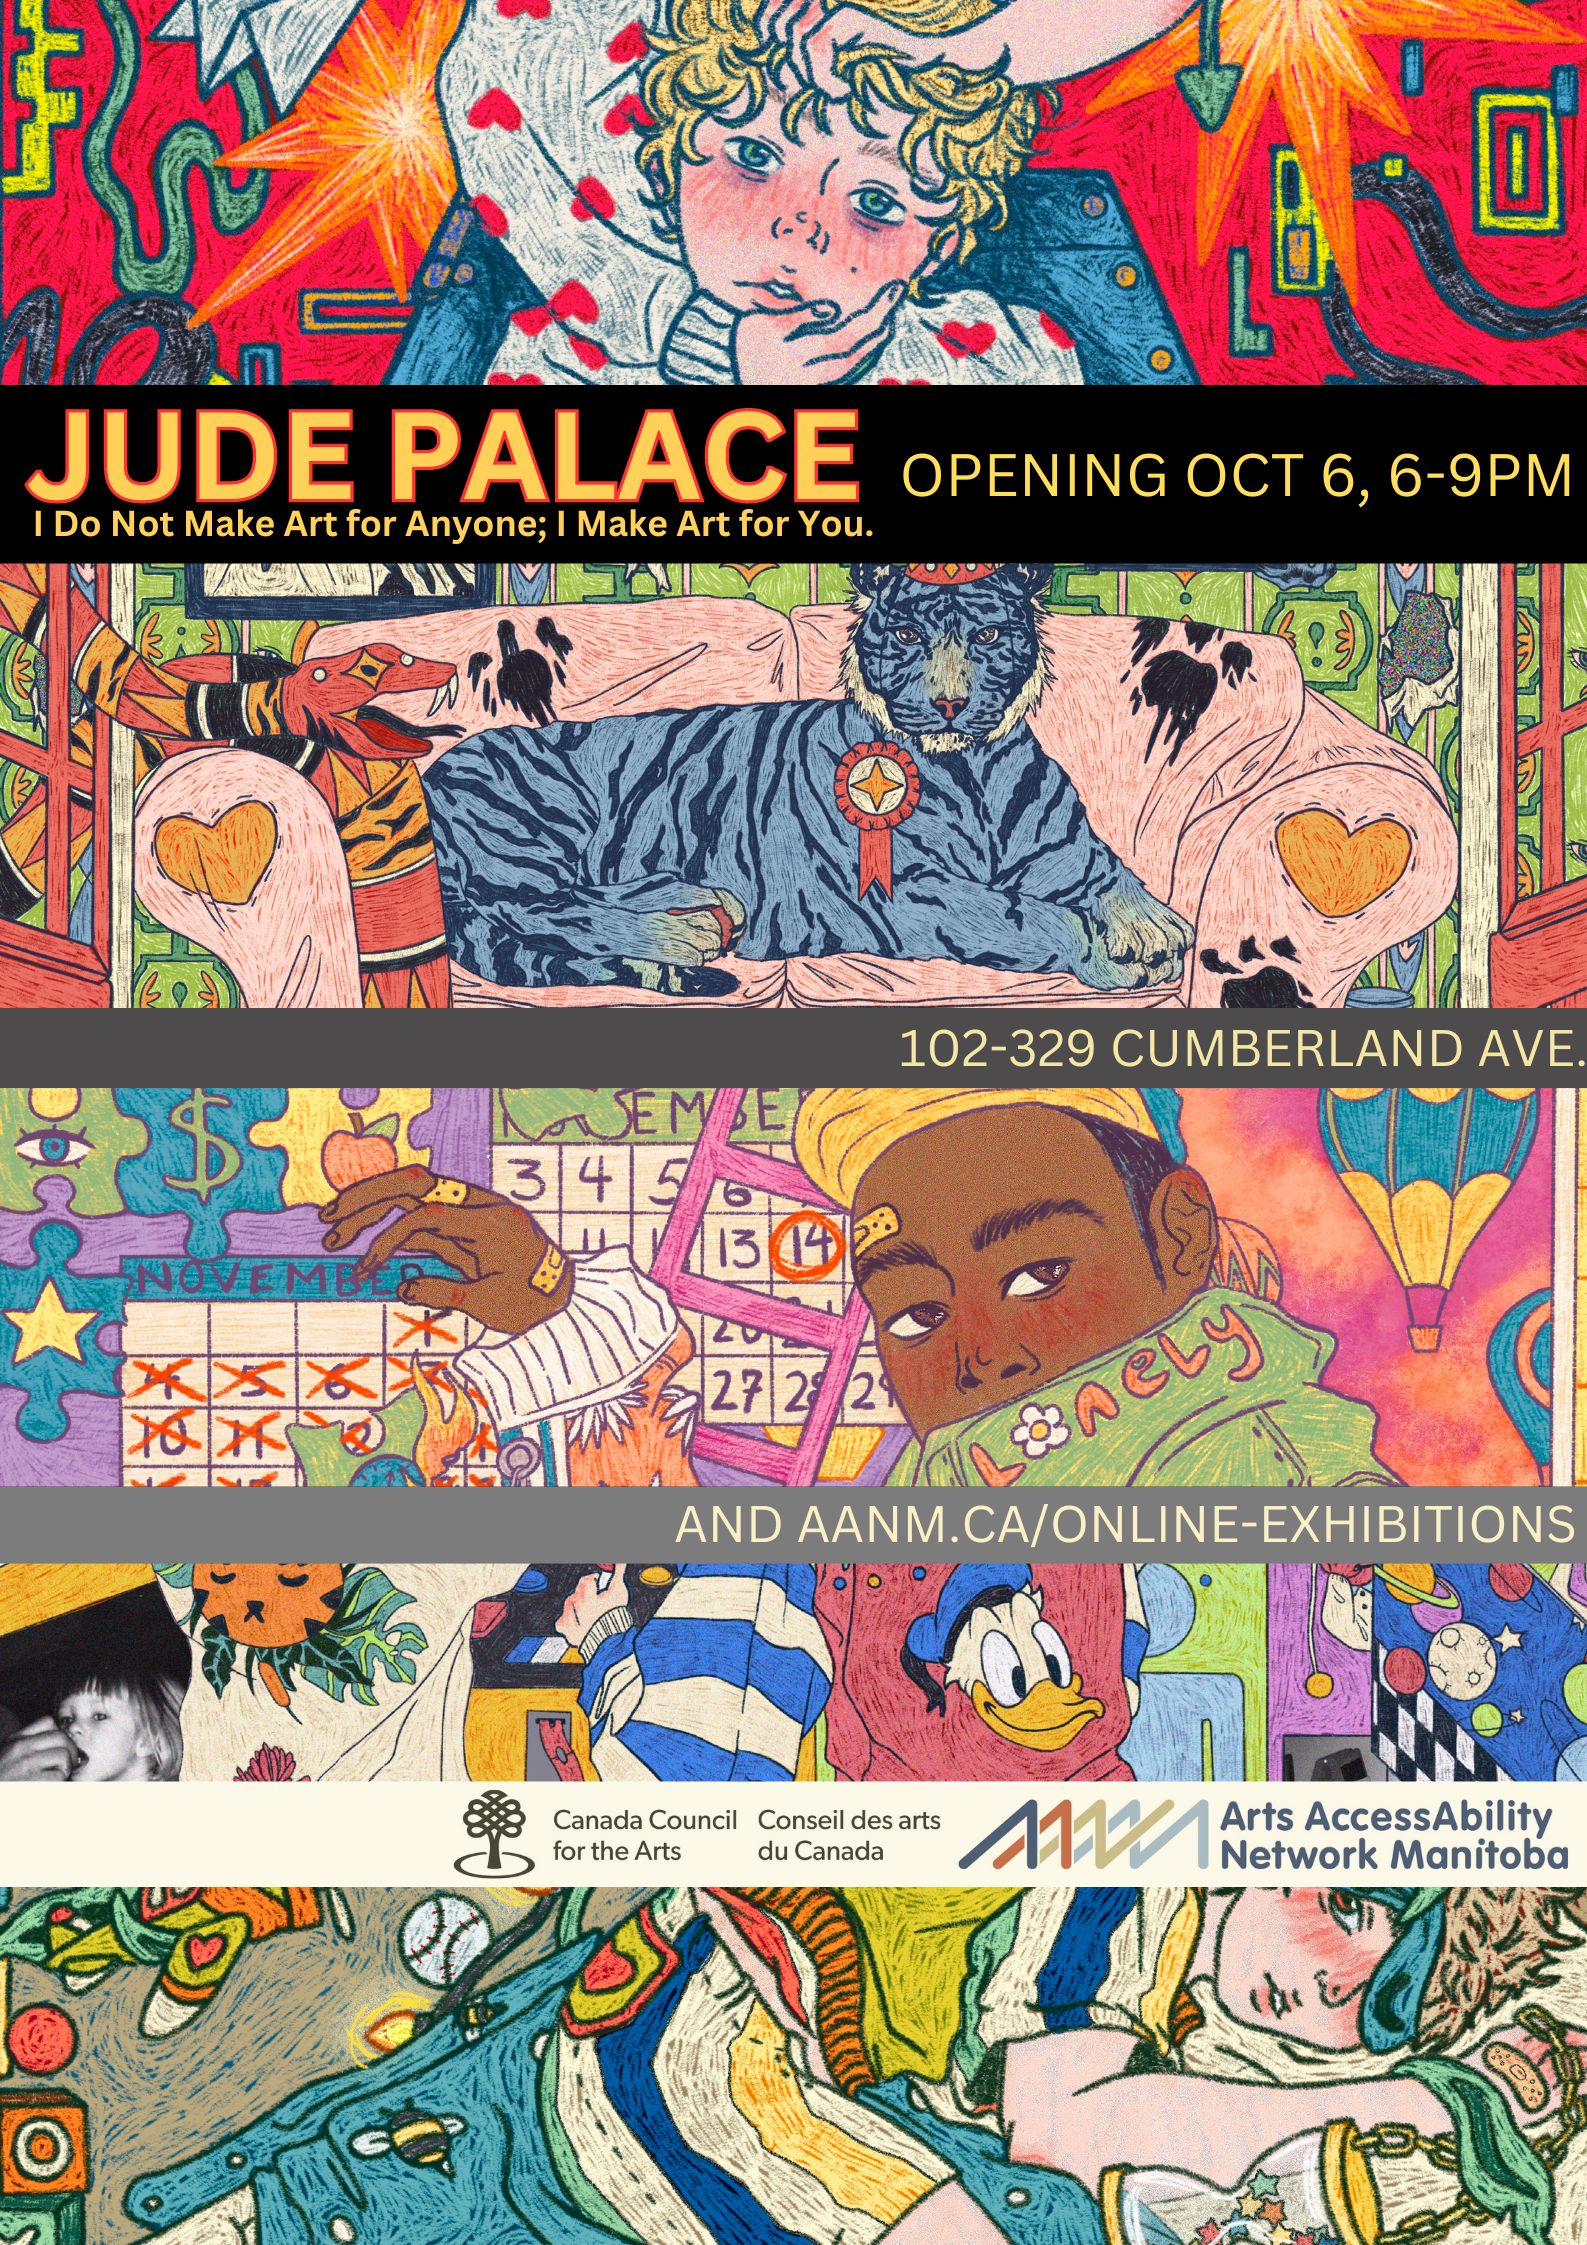 This is a poster advertising Jude Palace’s digital drawing show at AANM Gallery102-329 Cumberland Avenue, opening October 6 from 6-9pm, and available online at aanm.ca/online-exhibitions. These details are displayed in lines of plain, bright high-contrast text, sandwiched between slices sampled from Palace’s work, along with the logos of the funder, Canada Council for the Arts, and AANM, as well as the title of the show, “I Do Not Make Art for Anyone; I Make Art for You.” Palace’s work is busy, exuberant, tragic, and appears as a chaotic jumble of bright colours, creating an intriguing narrative. Visible in the top image detail is a young, blonde boy with large blue eyes, calmly meeting our gaze, as the hands of someone in a white sweater studded with red hearts grasps his chin and hair as if preparing to wrench his head violently. The background is bright red with abstract lines snaking among orange and yellow star/explosions. In the image below that, we see a blue tiger sitting regally on a pink shabby sofa. A snake patterned with red, orange, and black is seen entering through a window and baring its fangs towards the tiger, who is sporting an award ribbon on his furry chest. The bottom image depicts a young Black boy in a yellow cap and green jacket, turning to meet our eye over his shoulder. On his collar in orange font is the word ‘lonely,’ in which the ‘o’ is denoted by a daisy. The boy is touching a wall calendar set to November, with a hand displaying bloody knuckles and multiple band-aids.